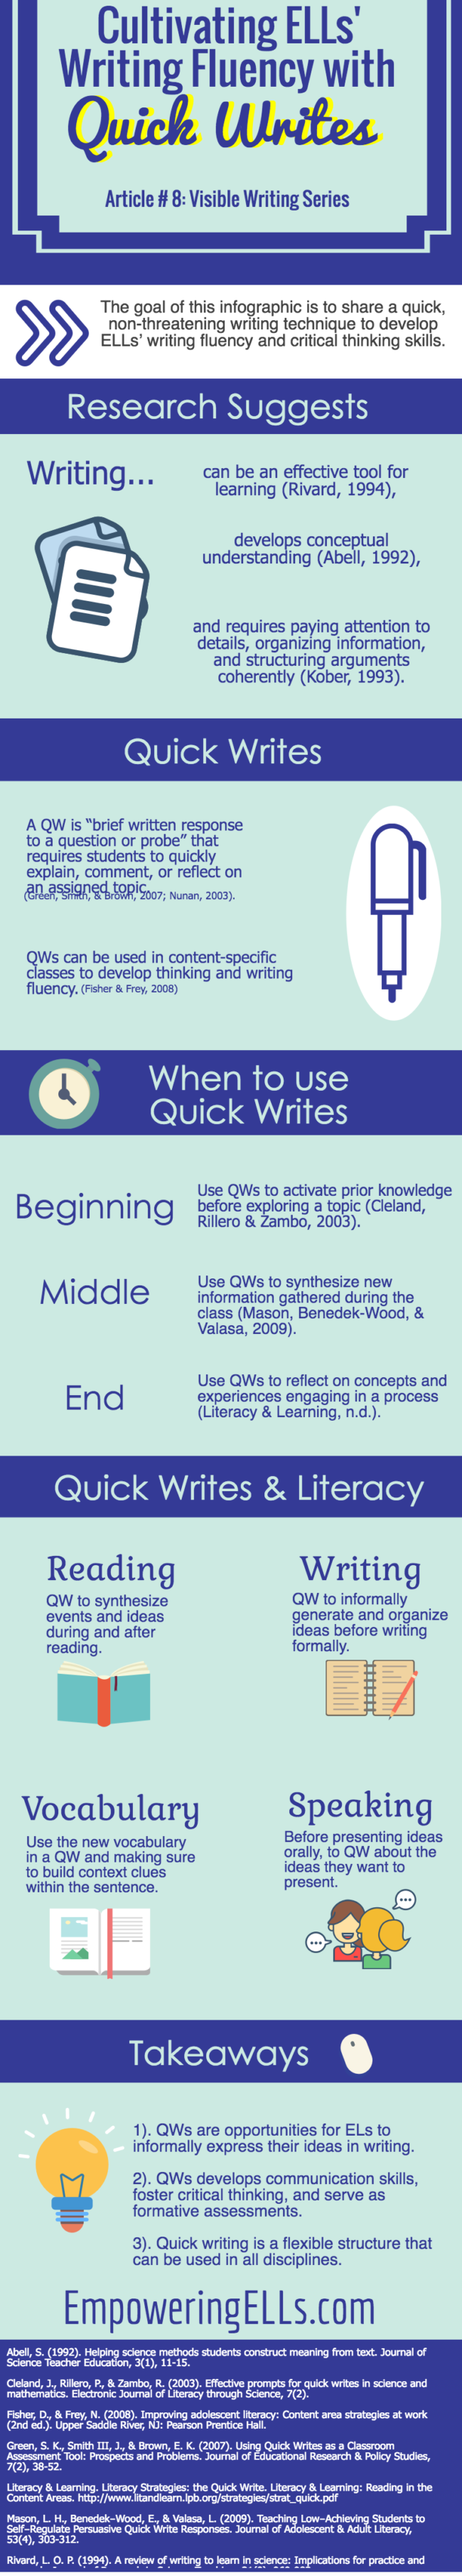 A8 Using Quick Writes with ELLs